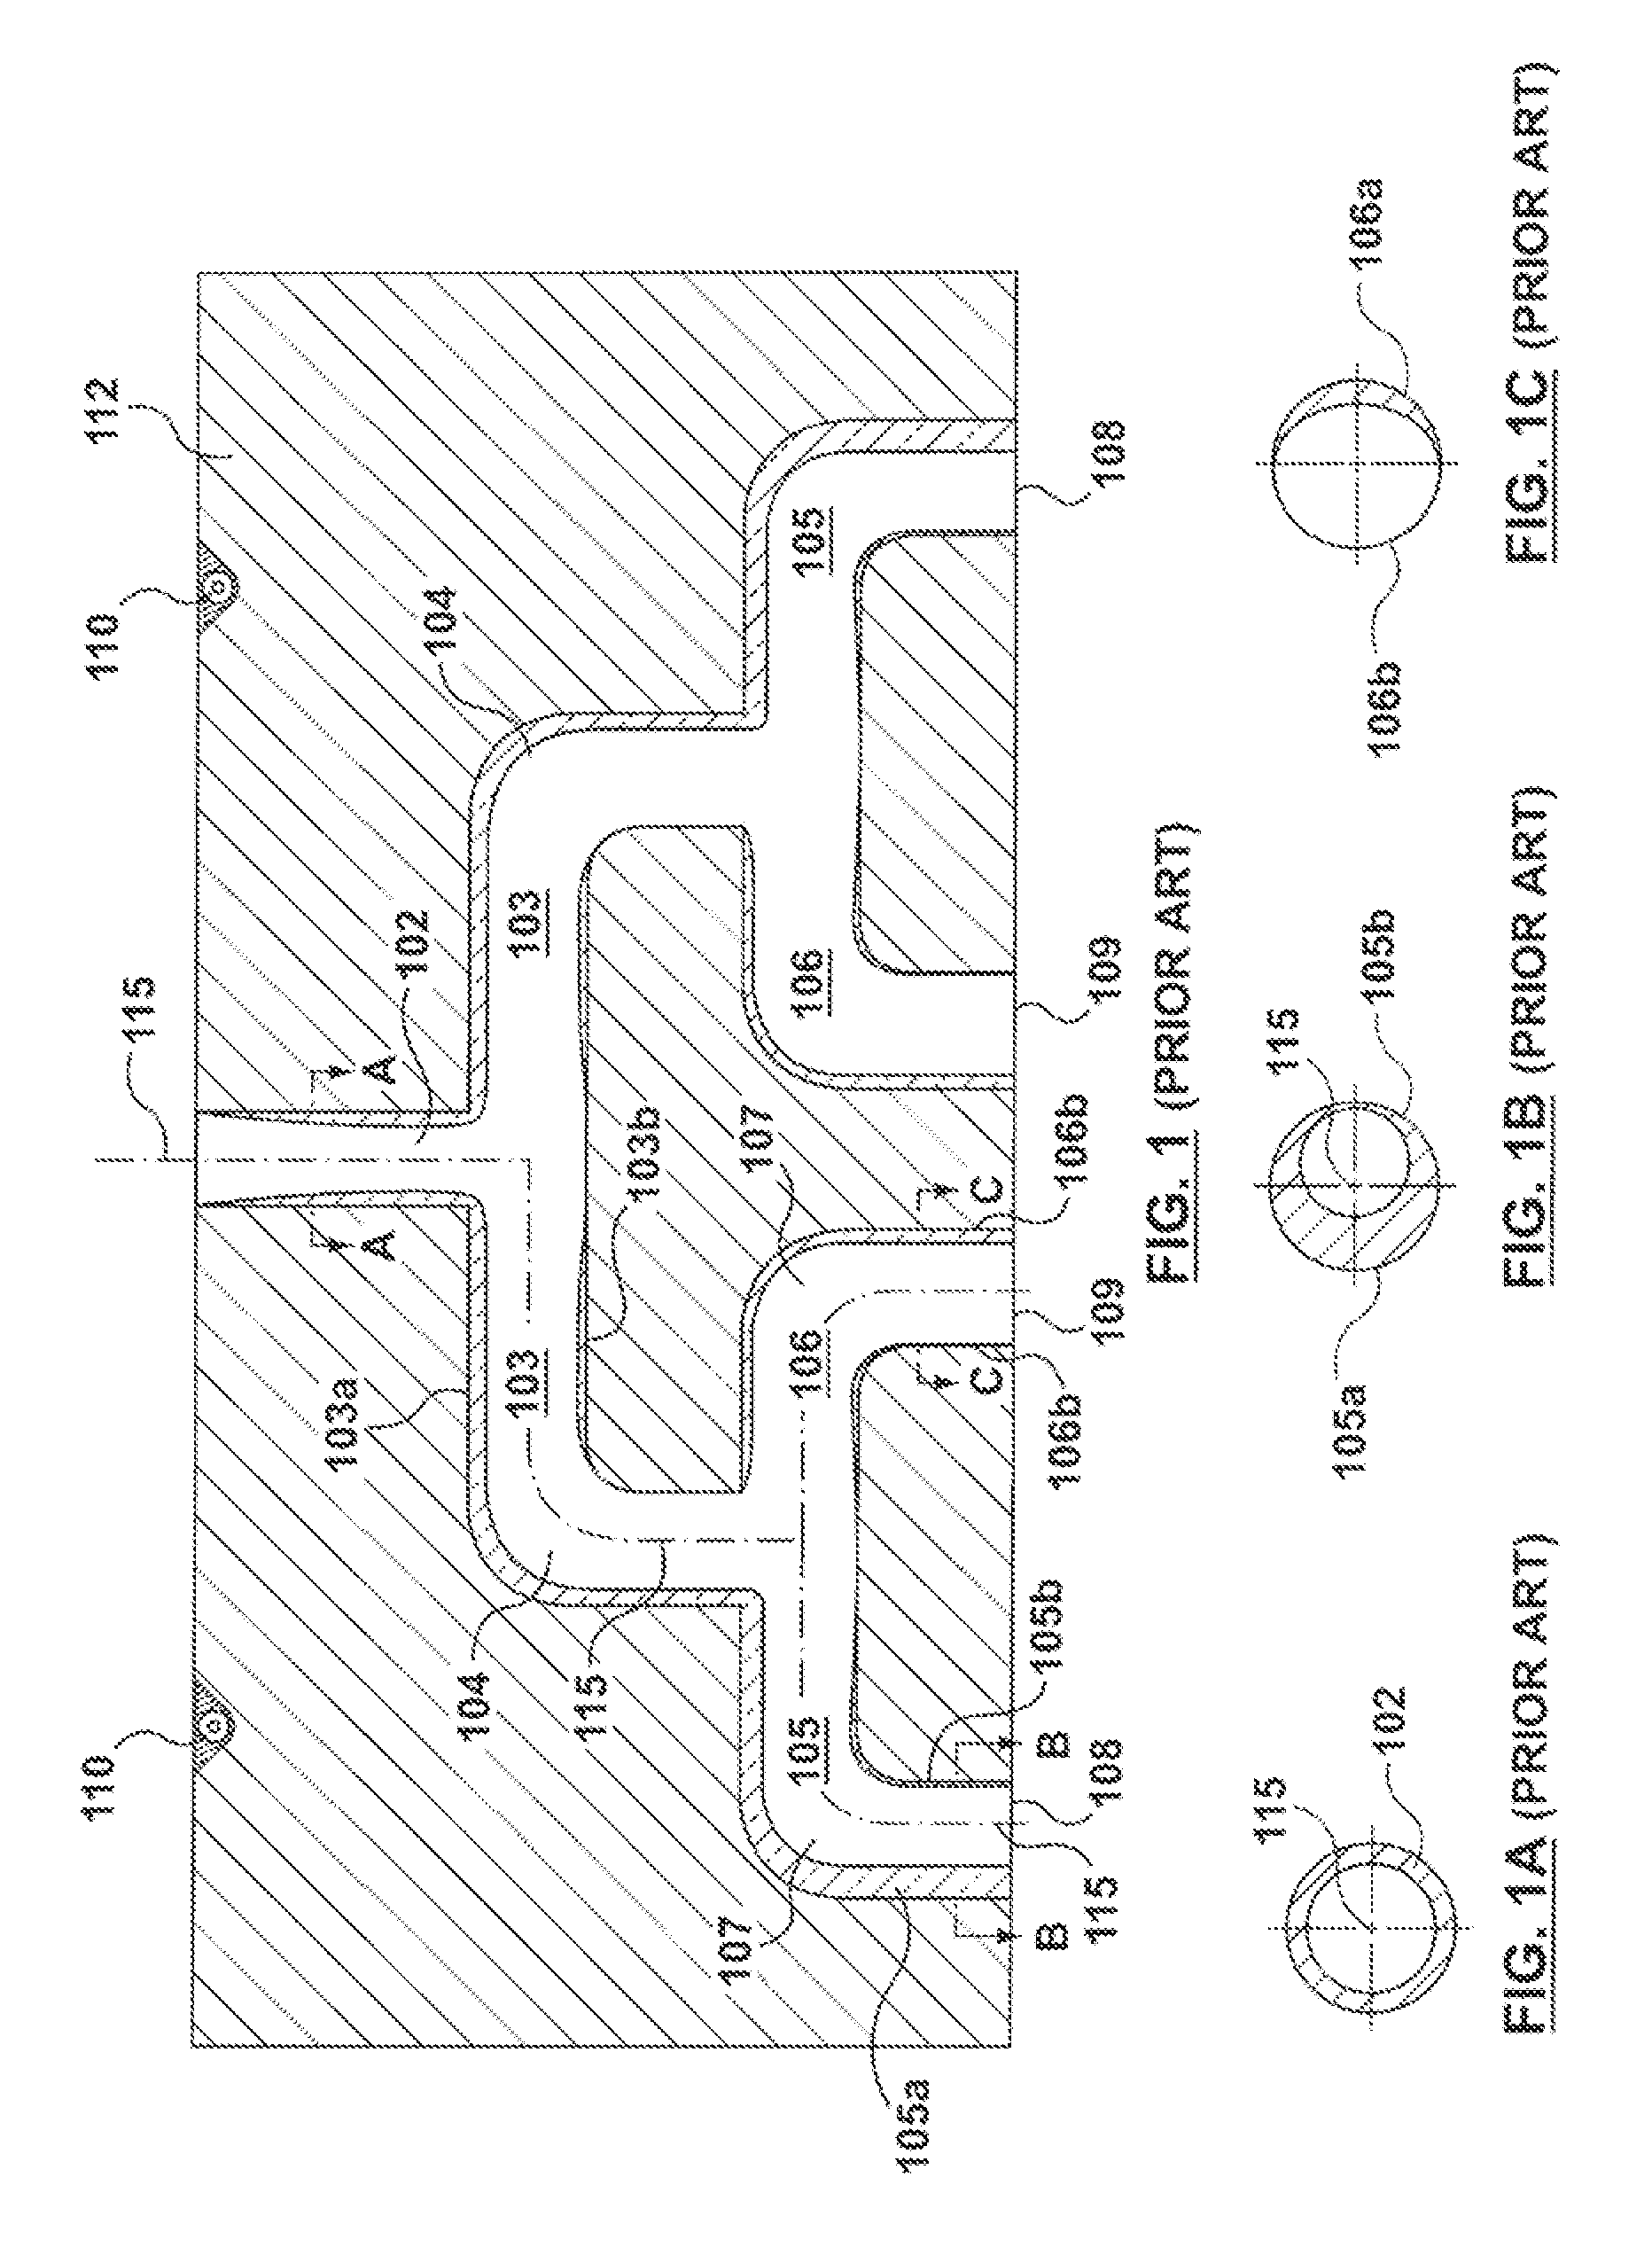 Melt Channel Geometries for an Injection Molding System